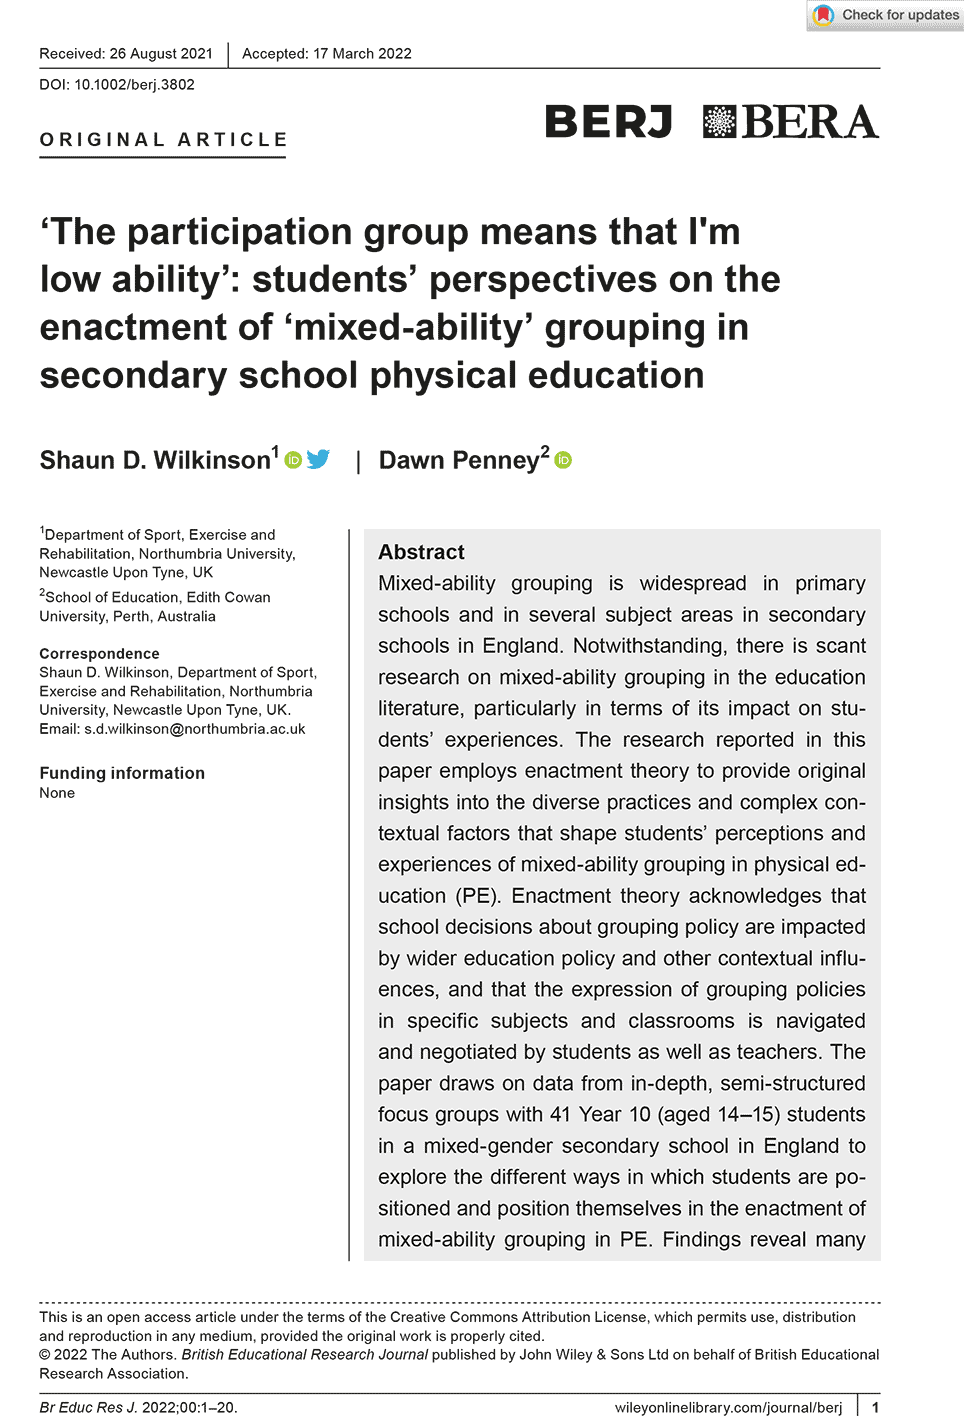 ‘The participation group means that I’m low ability’: students’ perspectives on the enactment of ‘mixed-ability’ grouping in secondary school physical education